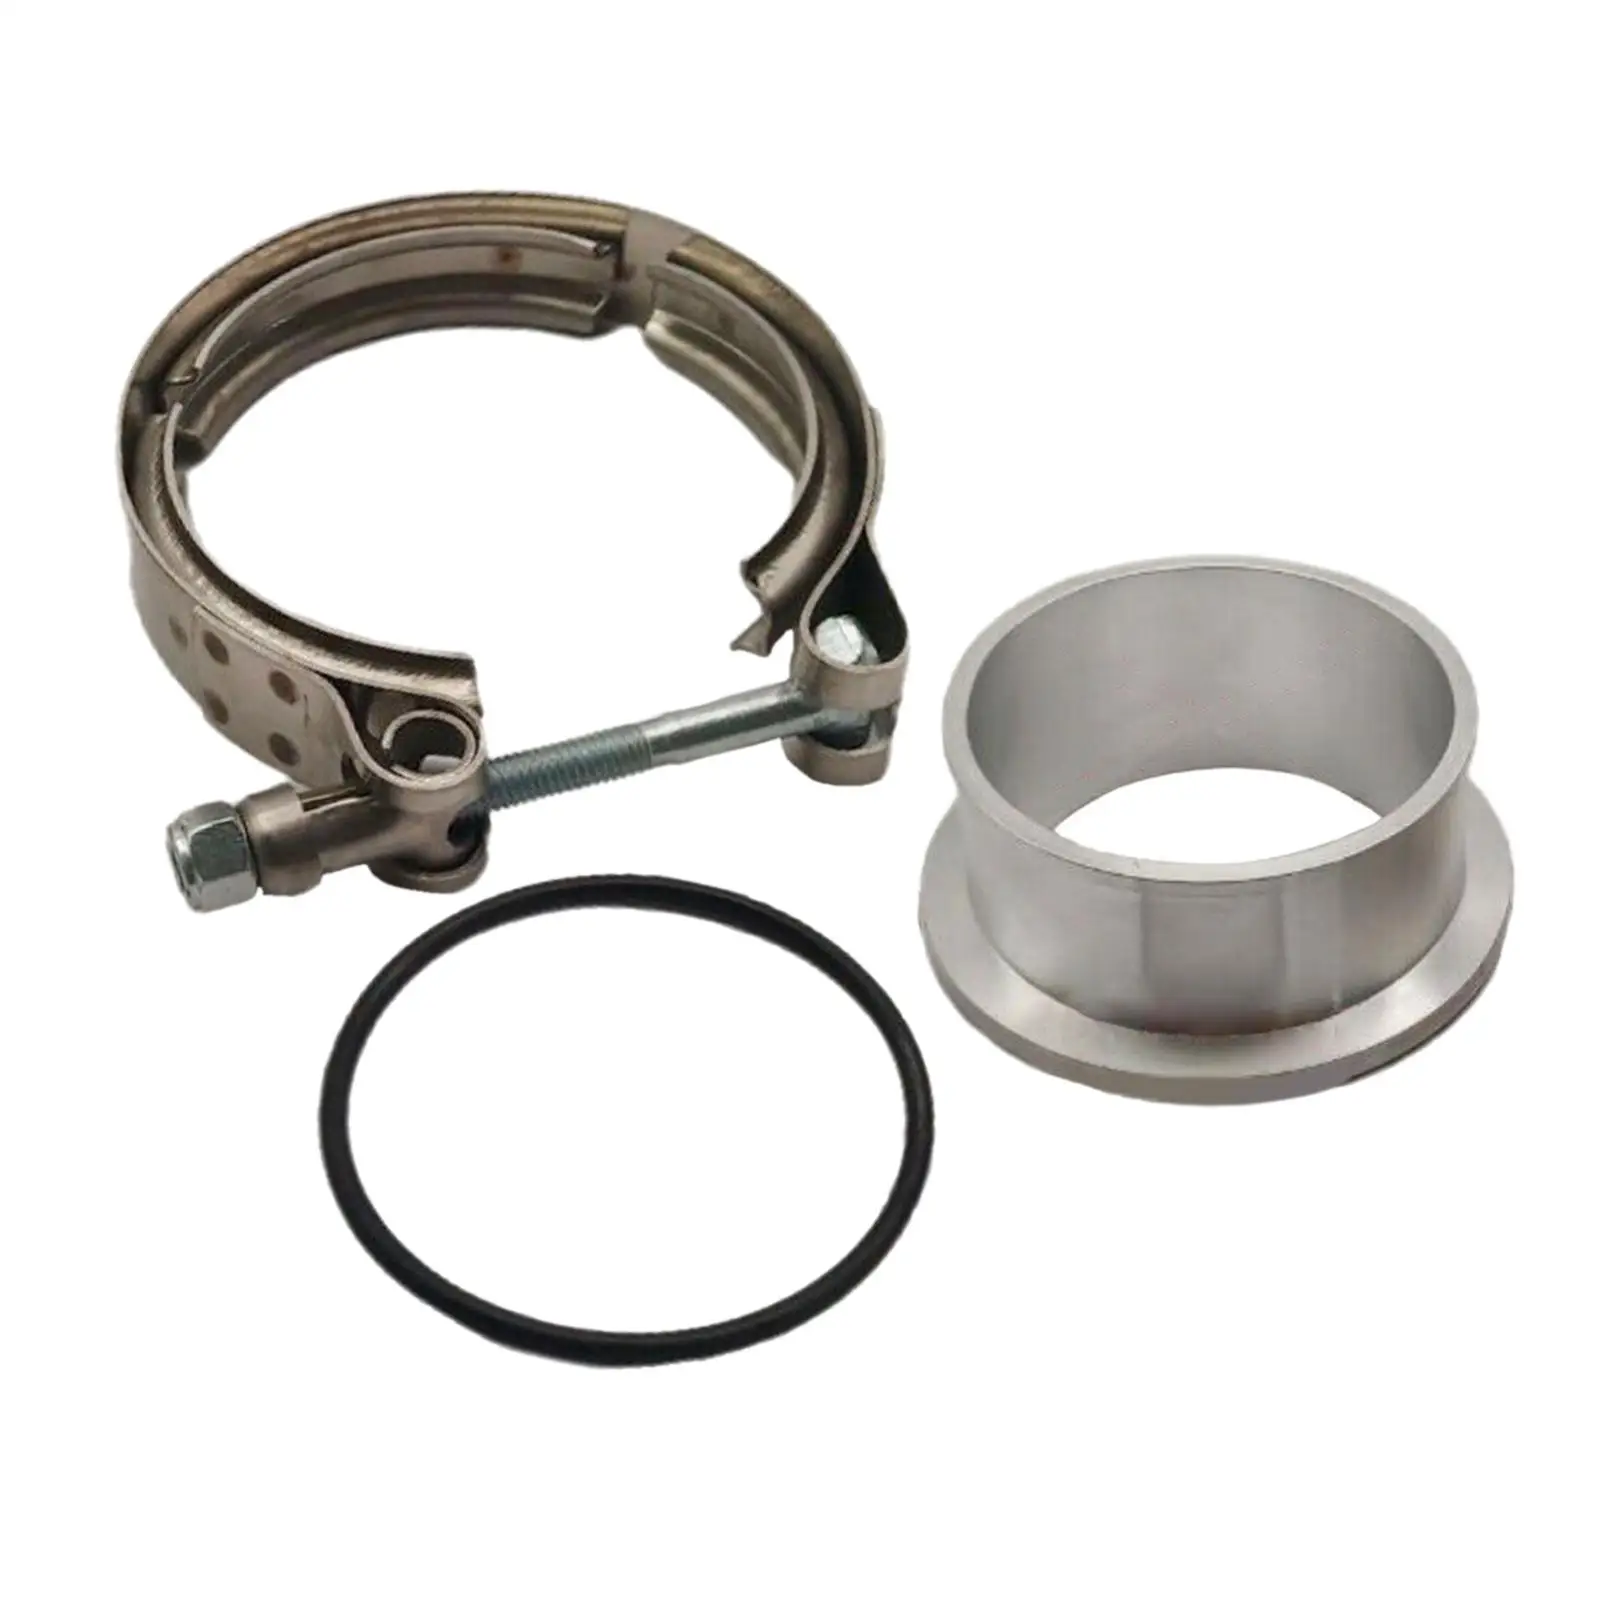 V Band Flange Clamp Excellent Quality Portable Turbo Air Transfer Pipe Clamp for HX35 HX35W HX40W Cummins Replacement Parts